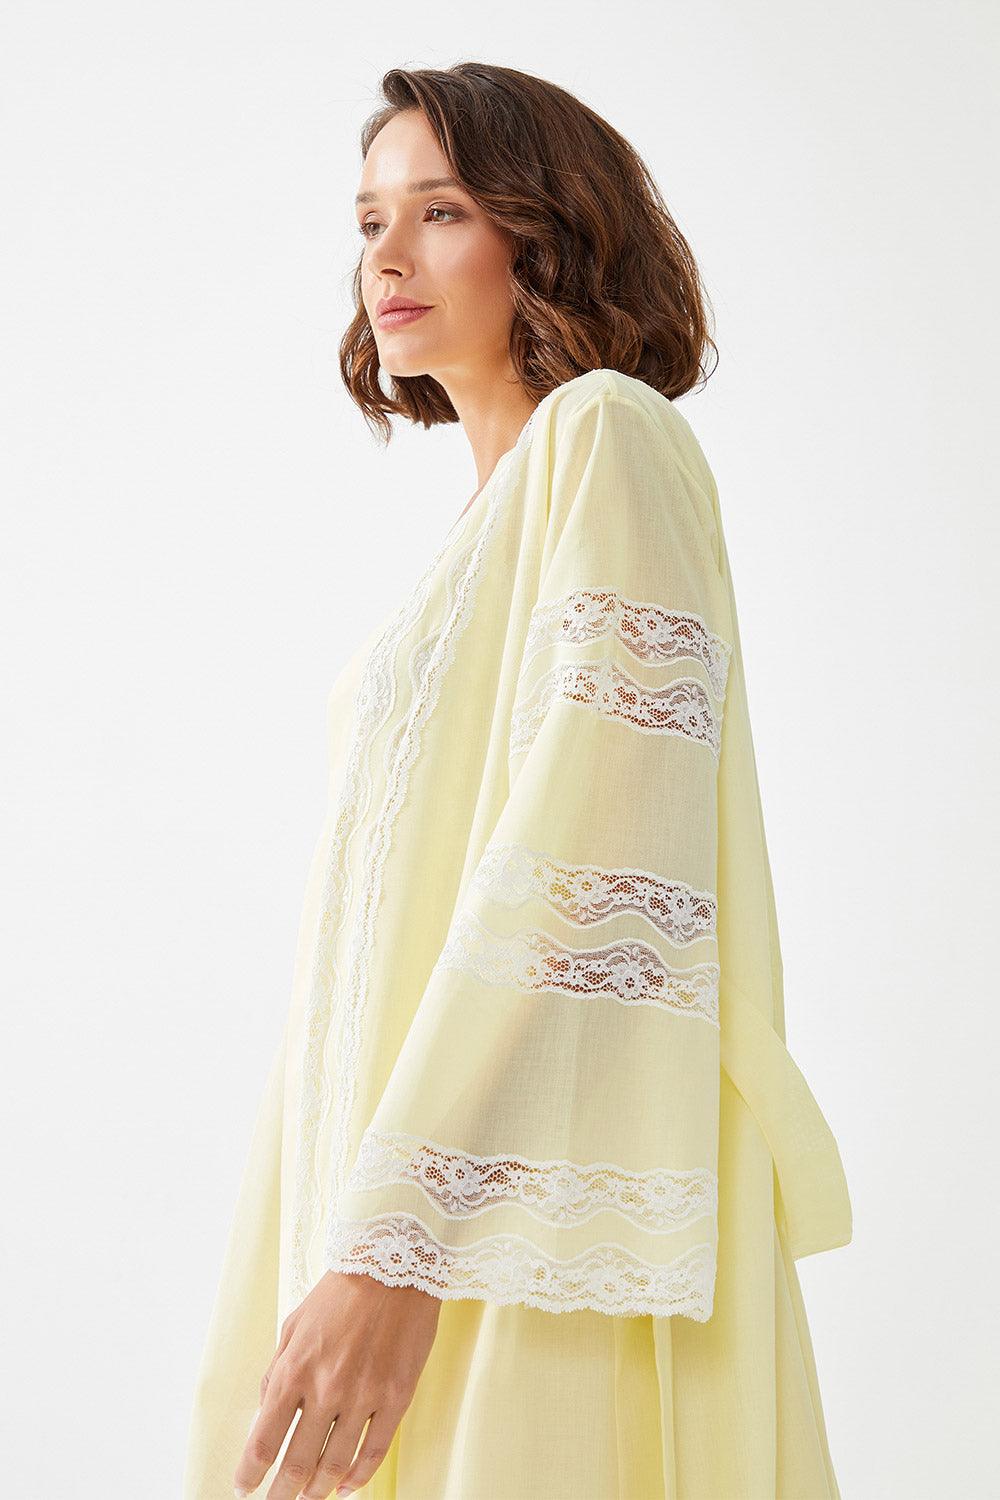 Dahlia Trimmed Cotton Voile Long Sleeve Robe Set - Baby Yellow - Bocan